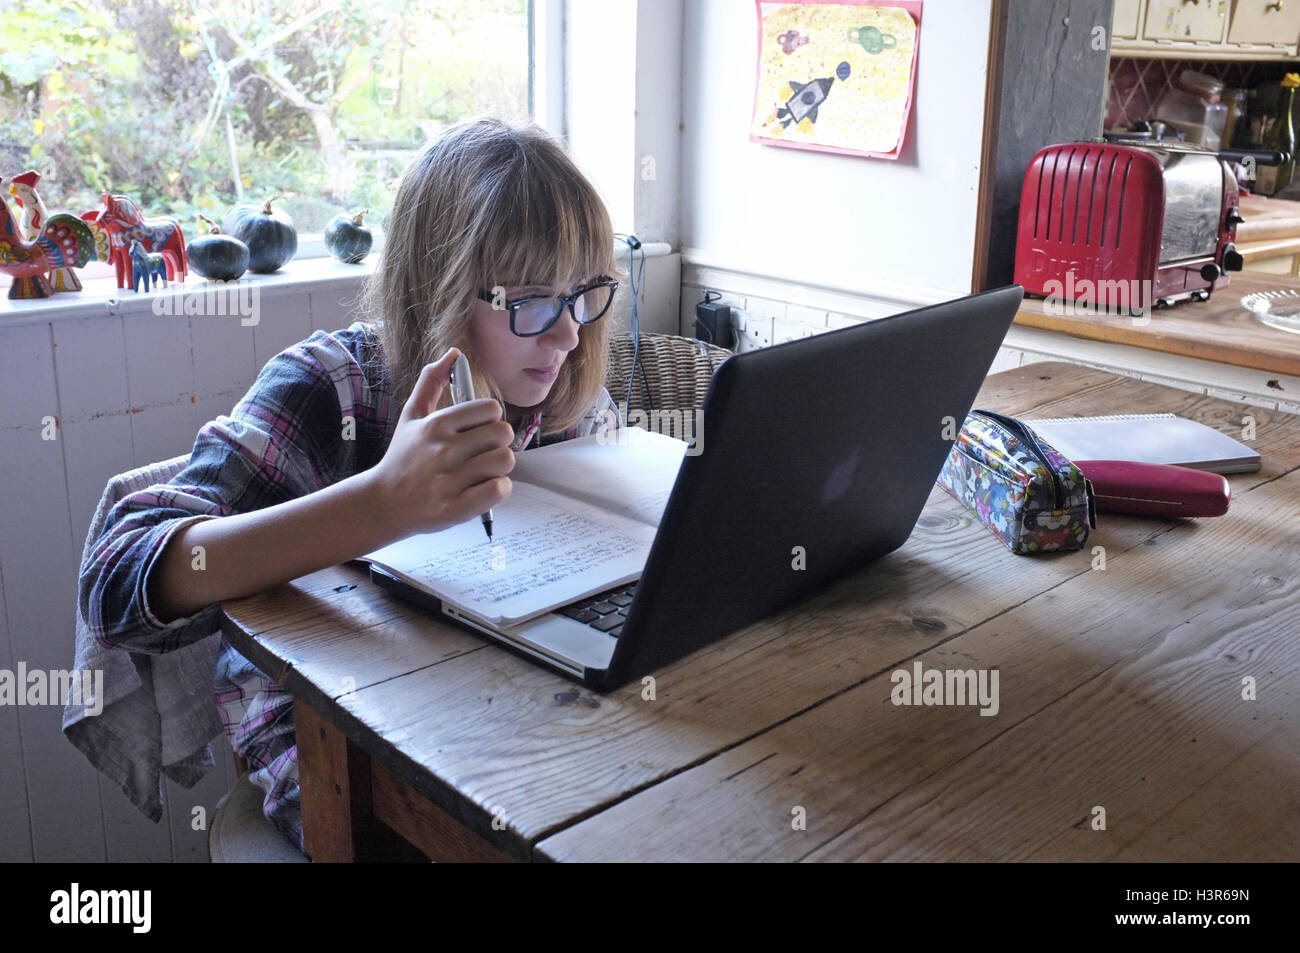 A 13 year old girl doing her homework on the kitchen table with her pajamas on. Stock Photo